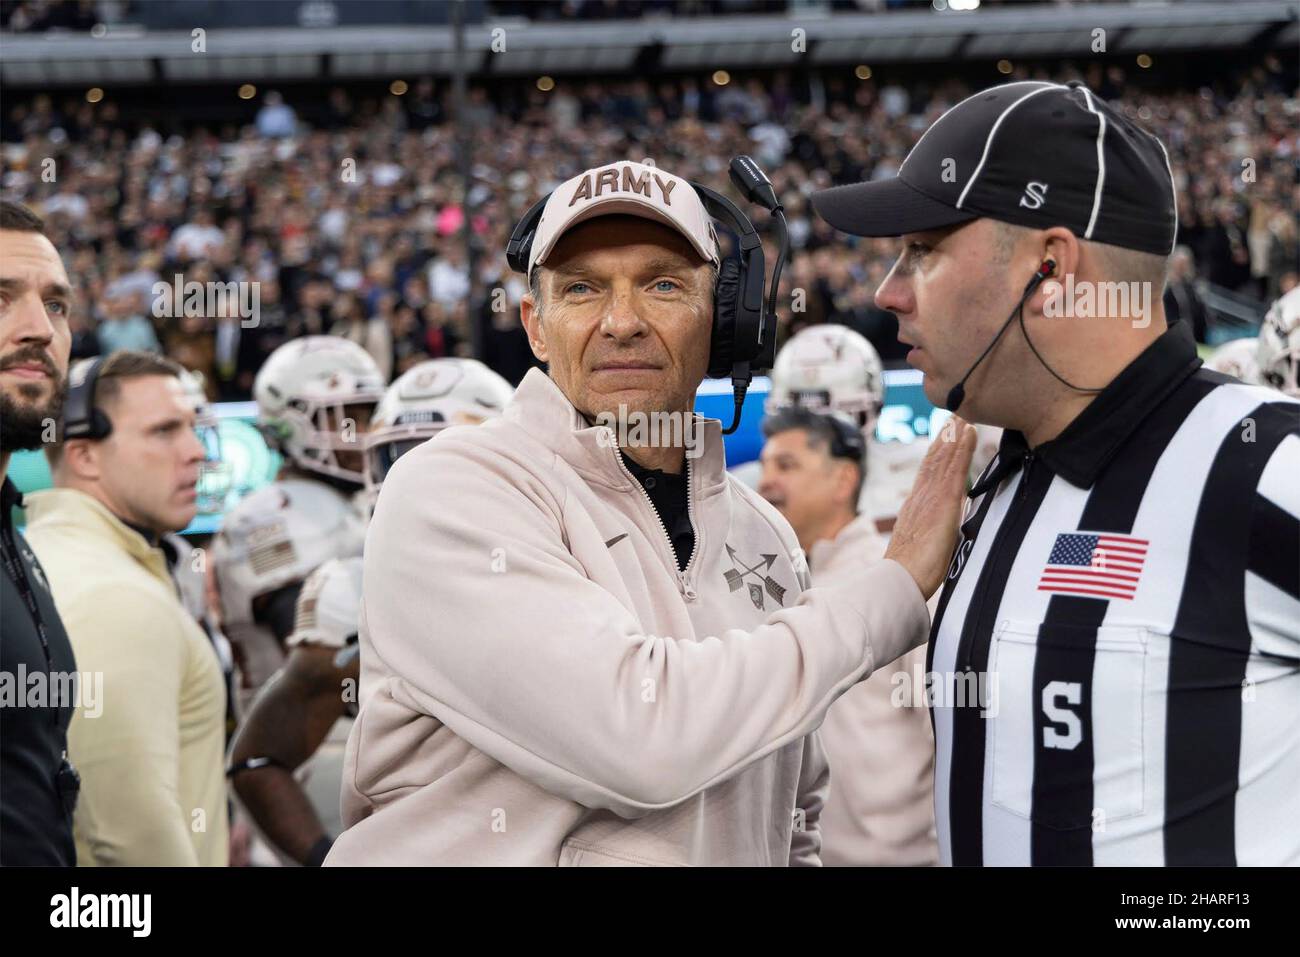 East Rutherford, United States of America. 11 December, 2021. U.S. West Point Military Academy football head coach Jeff Monken at the start of the annual Army-Navy football game at Metlife Stadium December 11, 2021 in East Rutherford, New Jersey. The U.S. Naval Academy Midshipmen defeated the Army Black Knights 17-13 in their 122nd matchup.  Credit: CDT Hannah Lamb/DOD/Alamy Live News Stock Photo